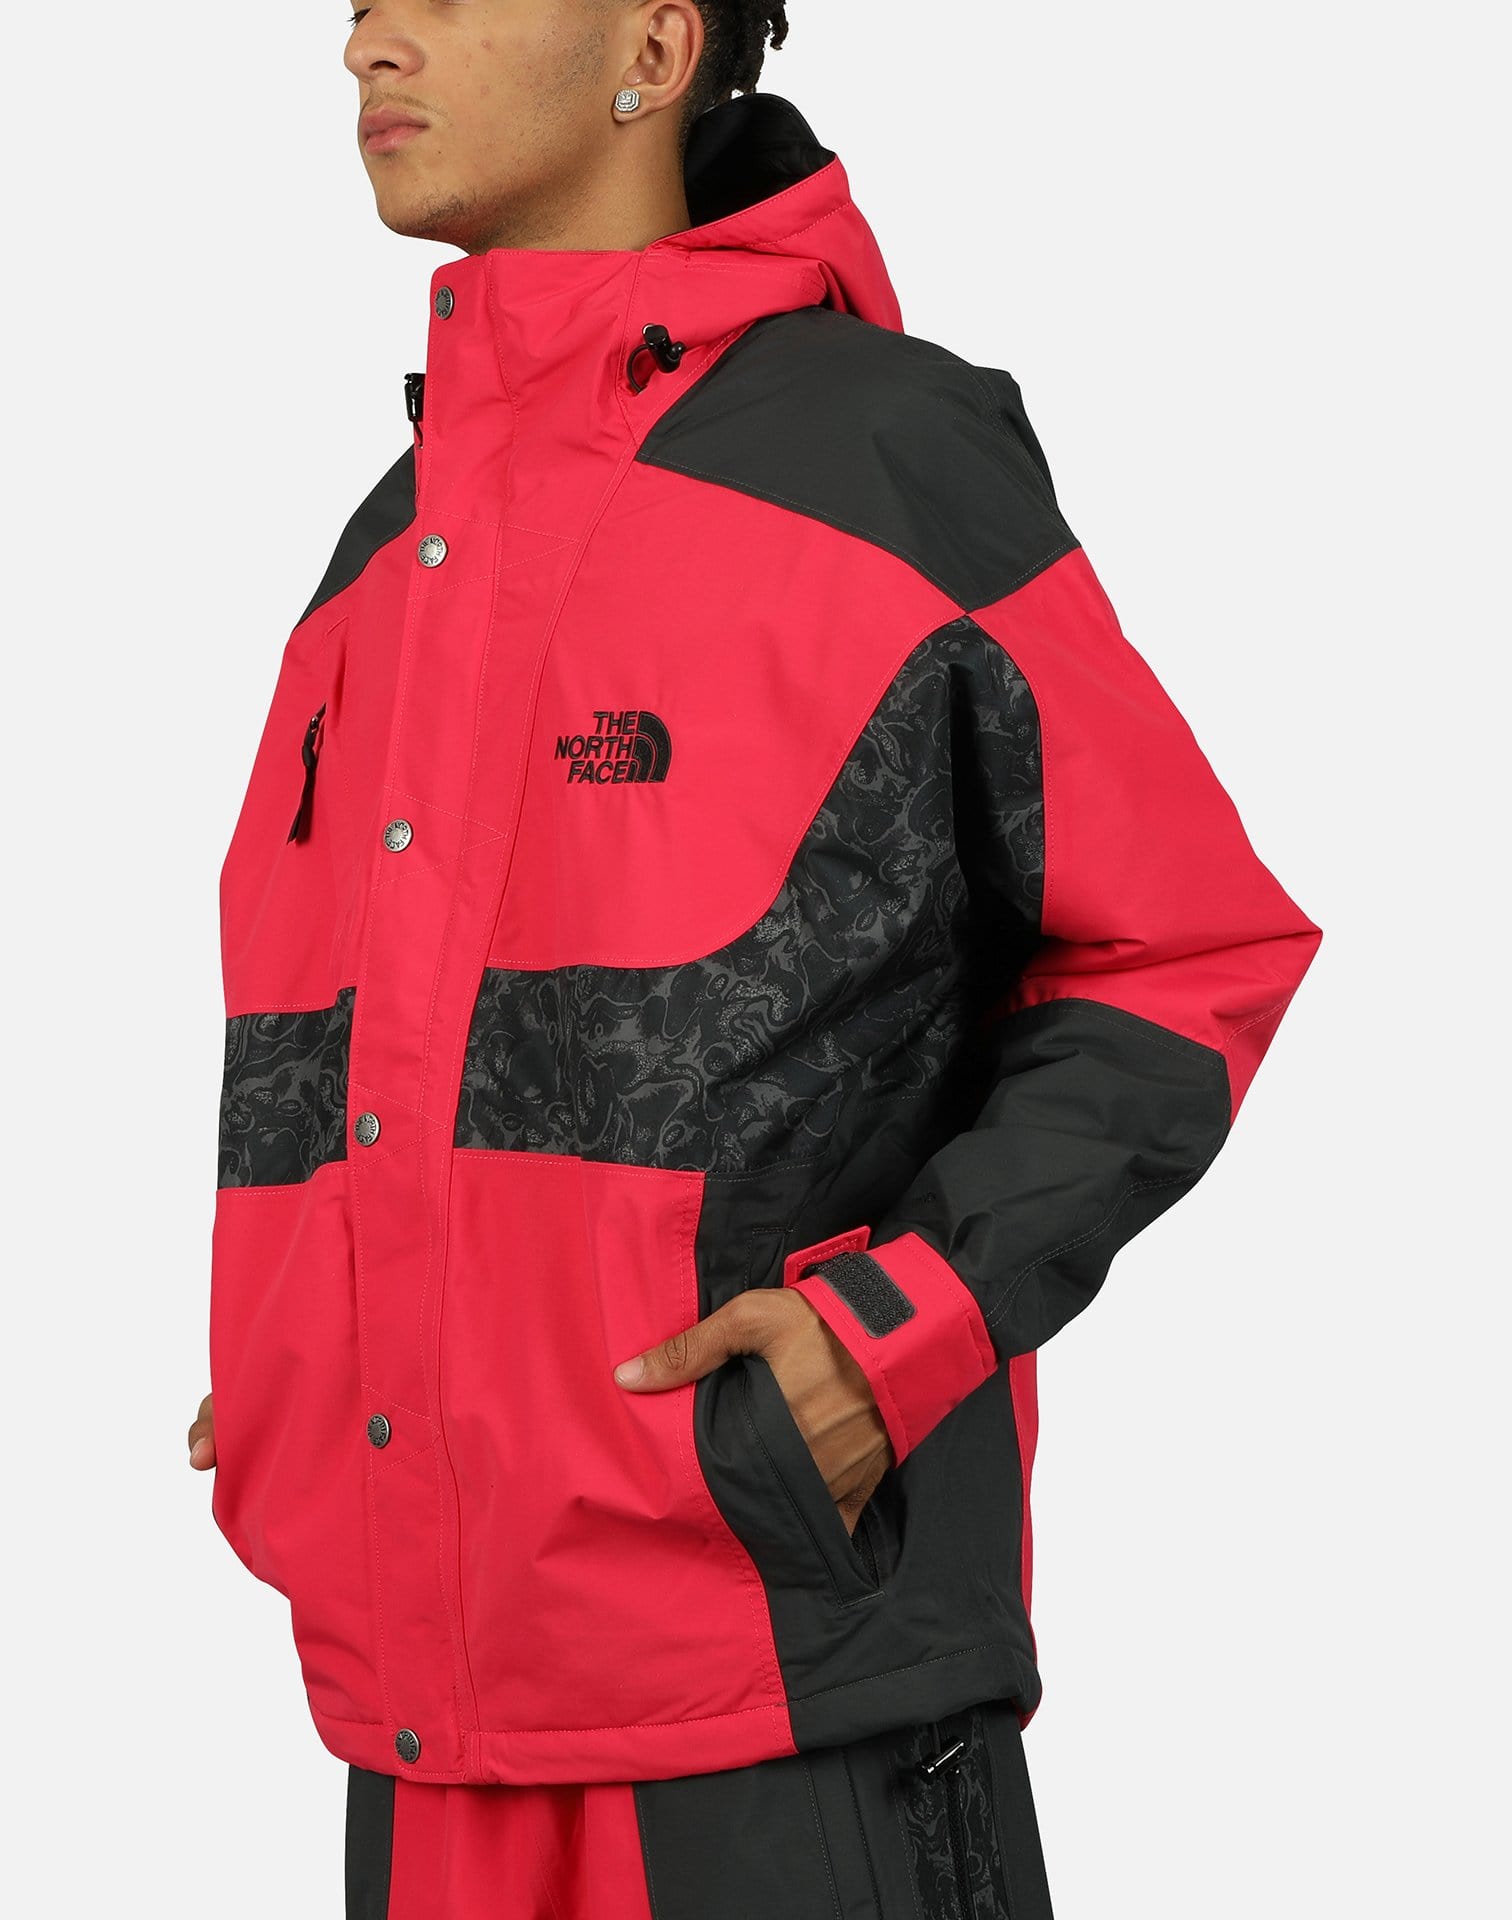 The North Face Men's '94 Rage Waterproof Synthetic Insulated Jacket